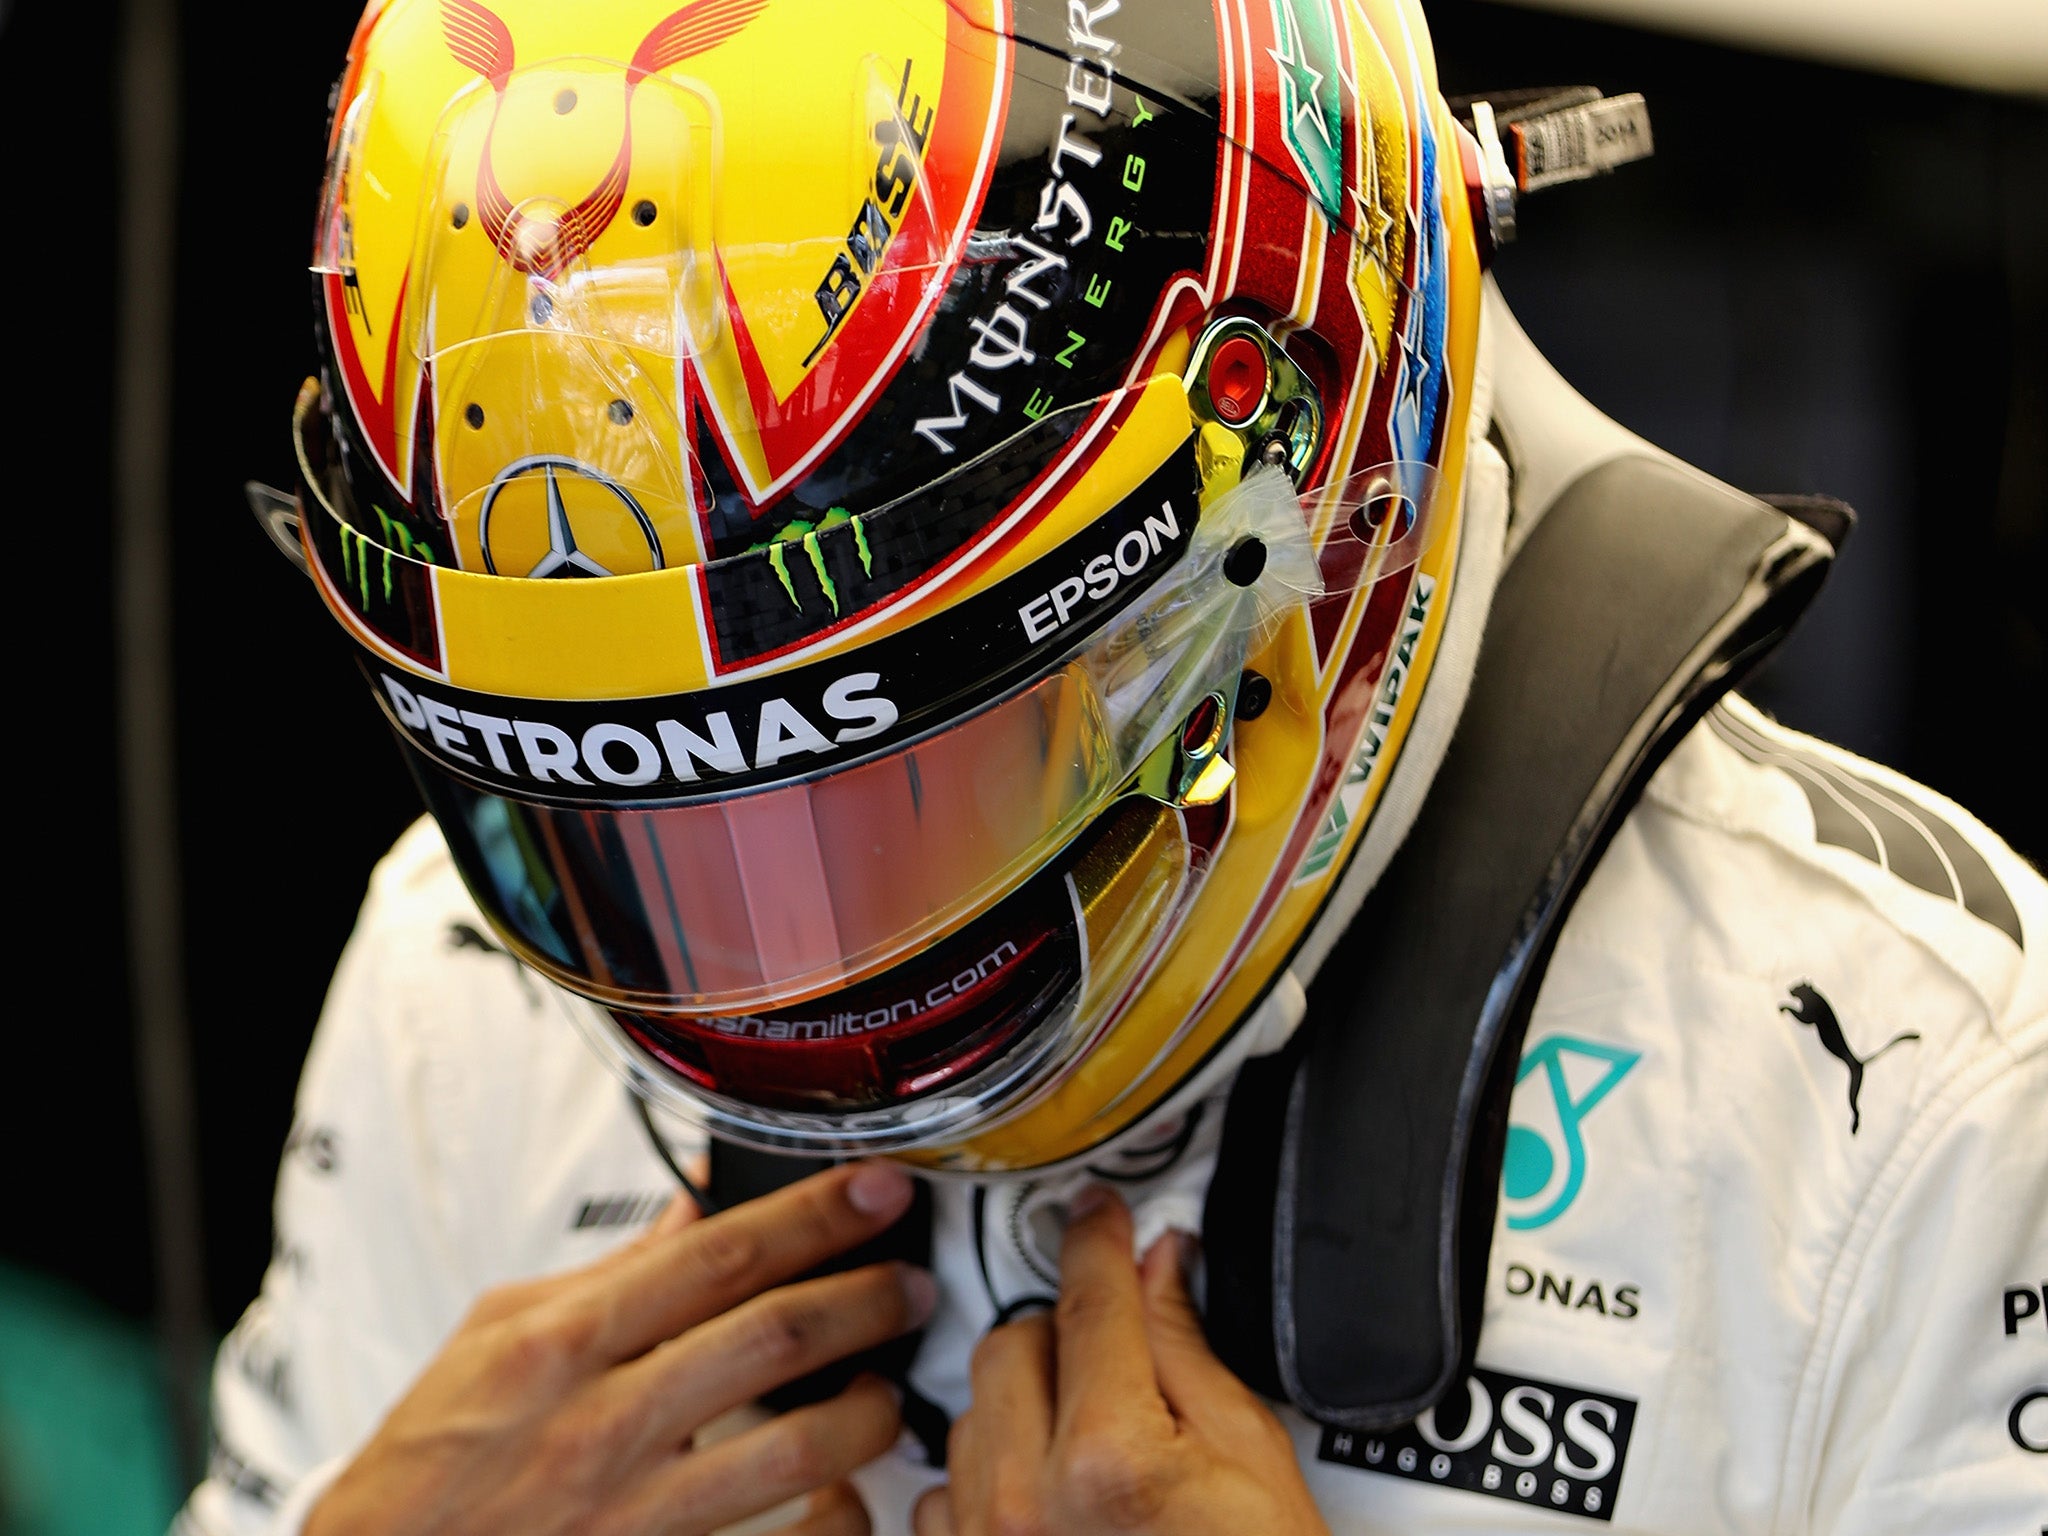 Hamilton started at 13th on the grid